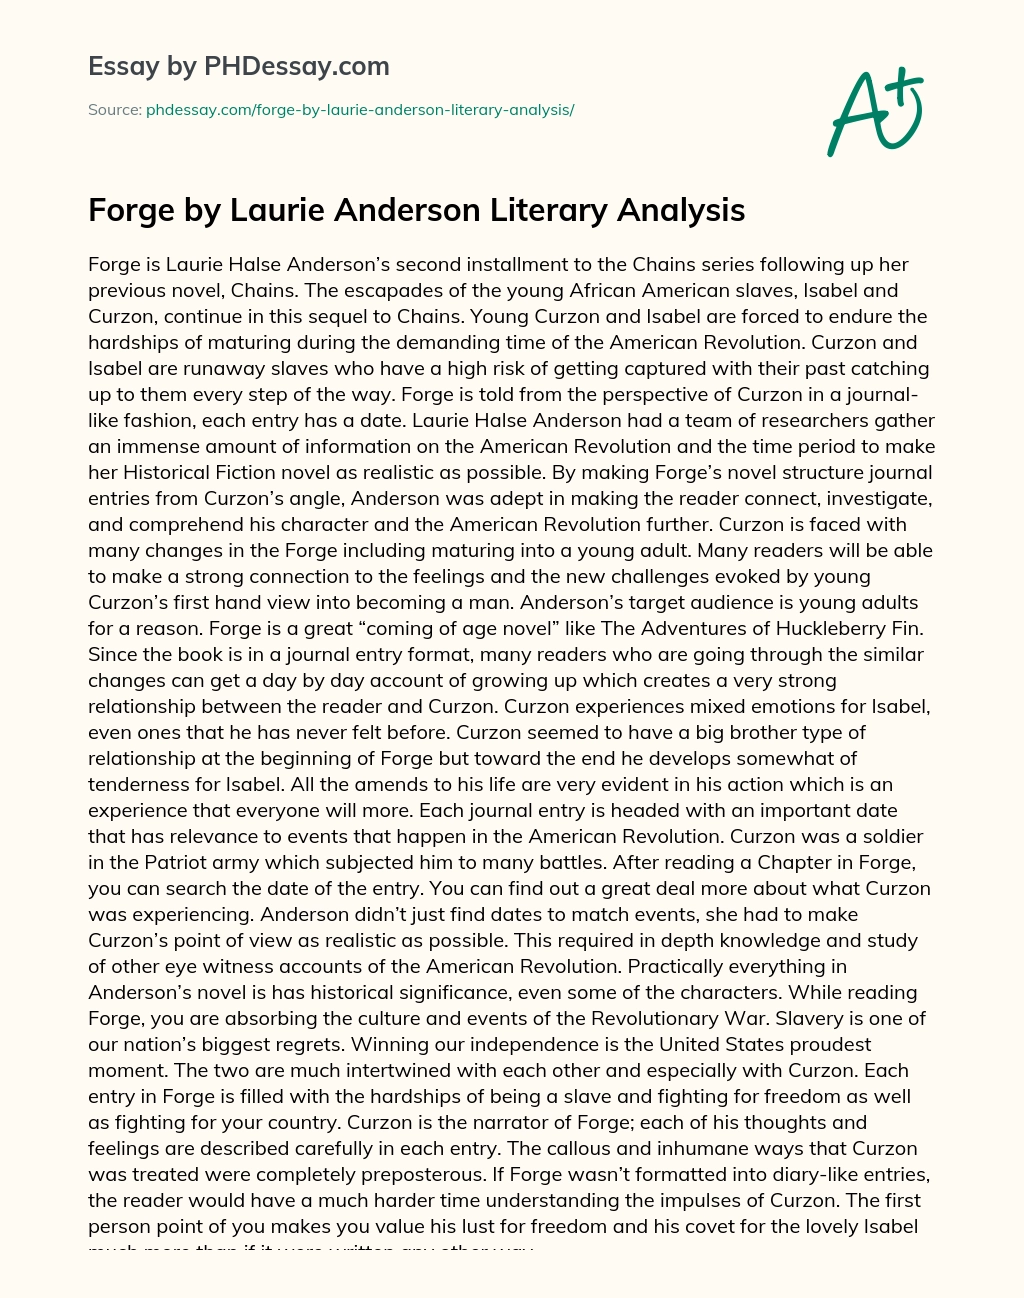 Forge by Laurie Anderson Literary Analysis essay